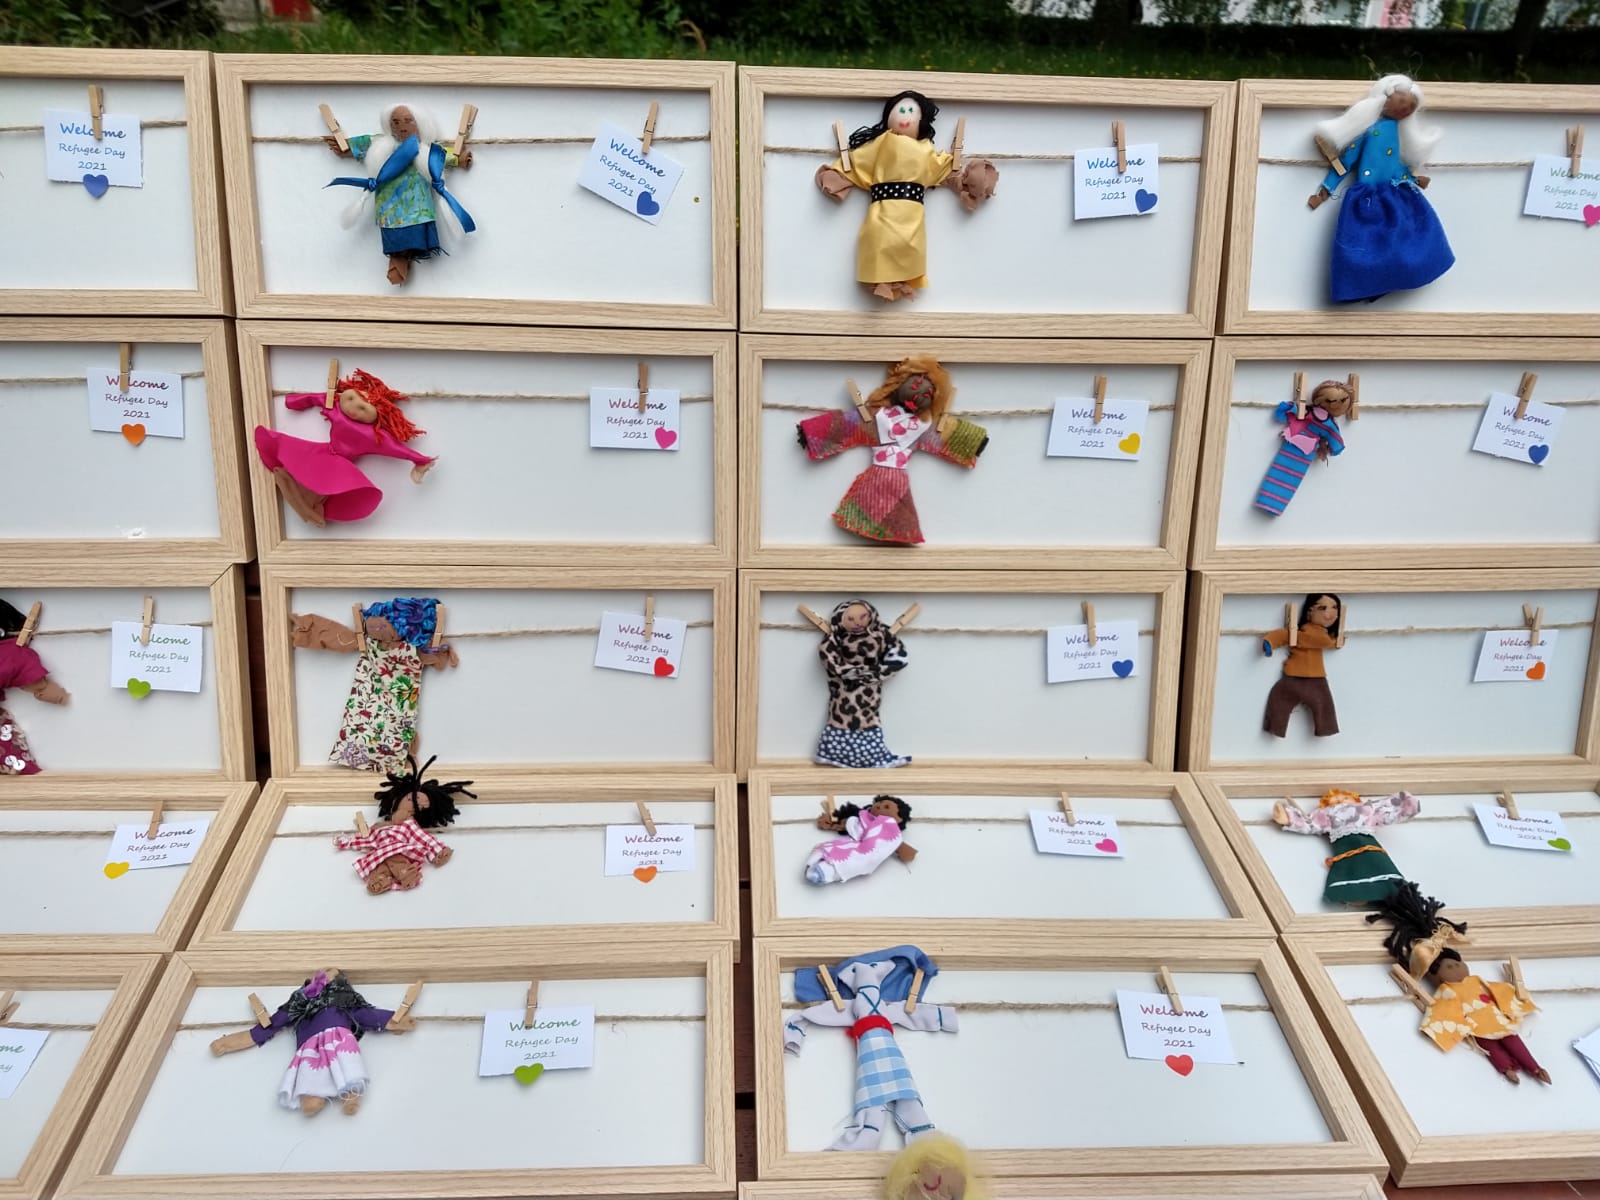 Some of the dolls completed at the Amnesty / Conflict Textiles Refugee Day 2021 outdoor workshop, as a welcome gift for the residents of Letterkenny Direct Provision Centre. (Photo: Anna Daly)